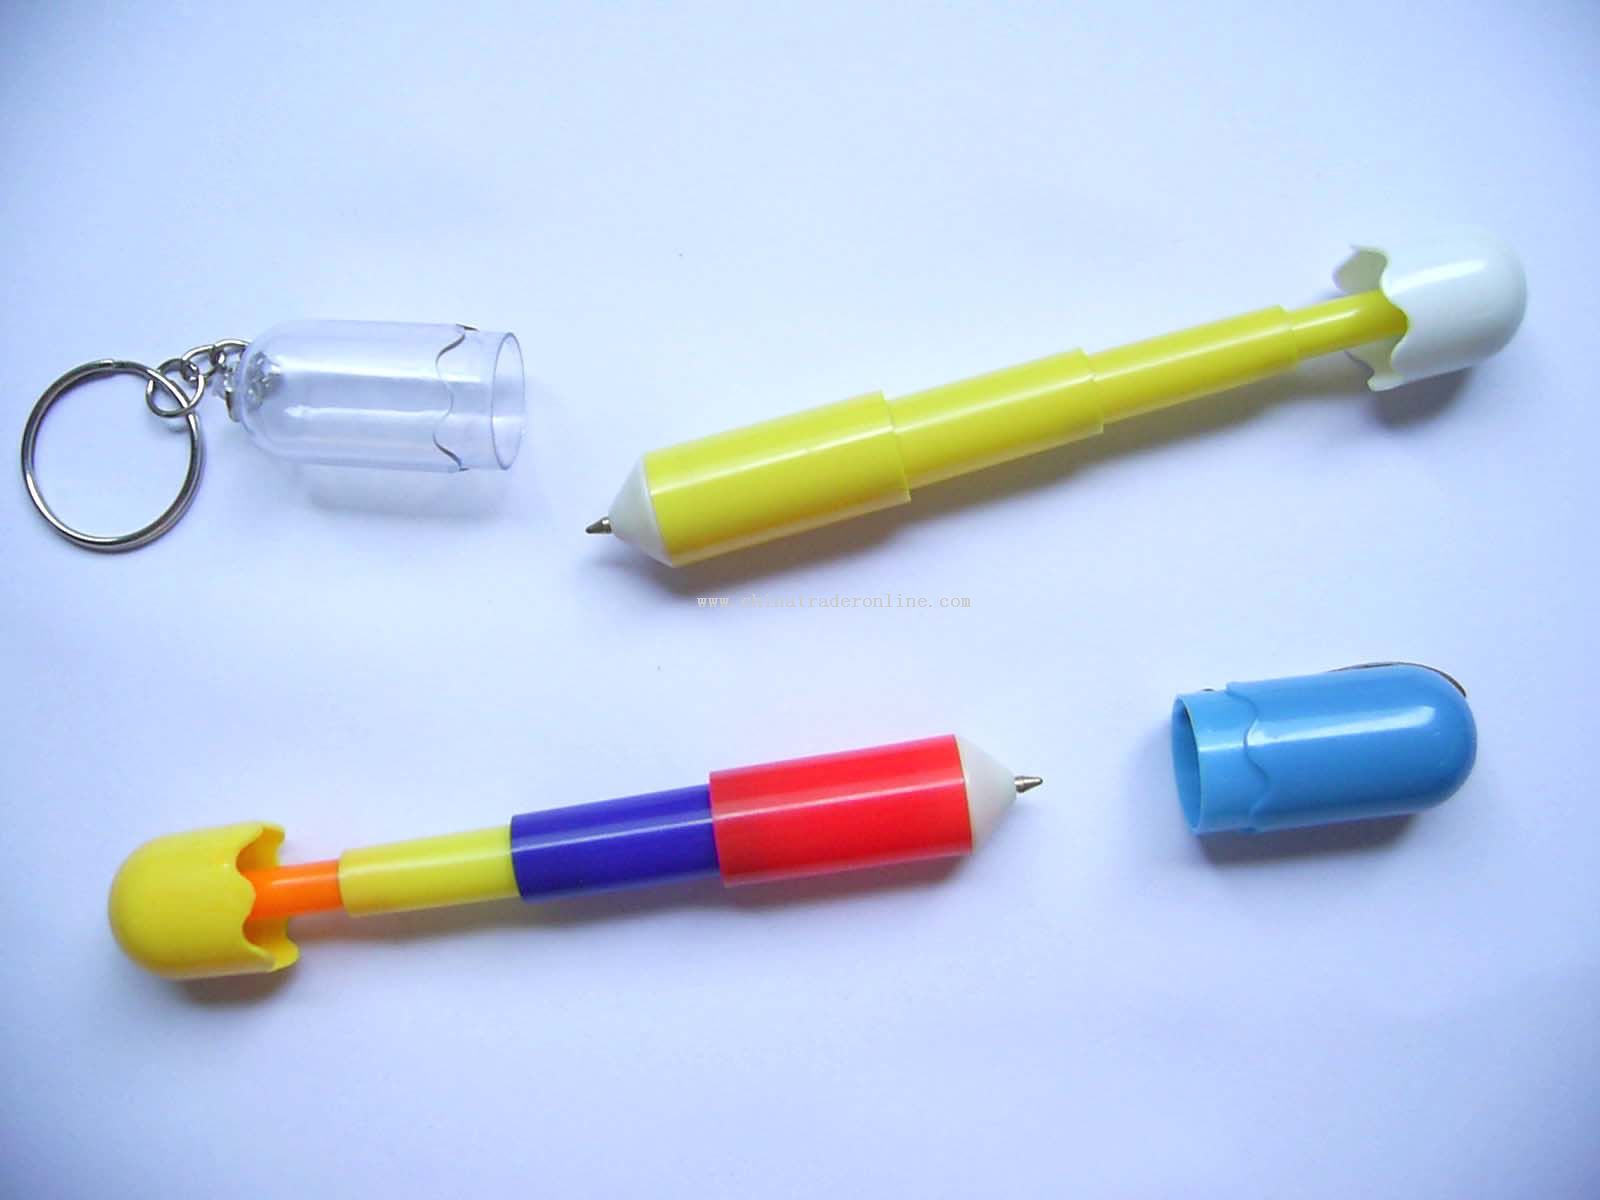 Pill shaped pen with keychain or clamp